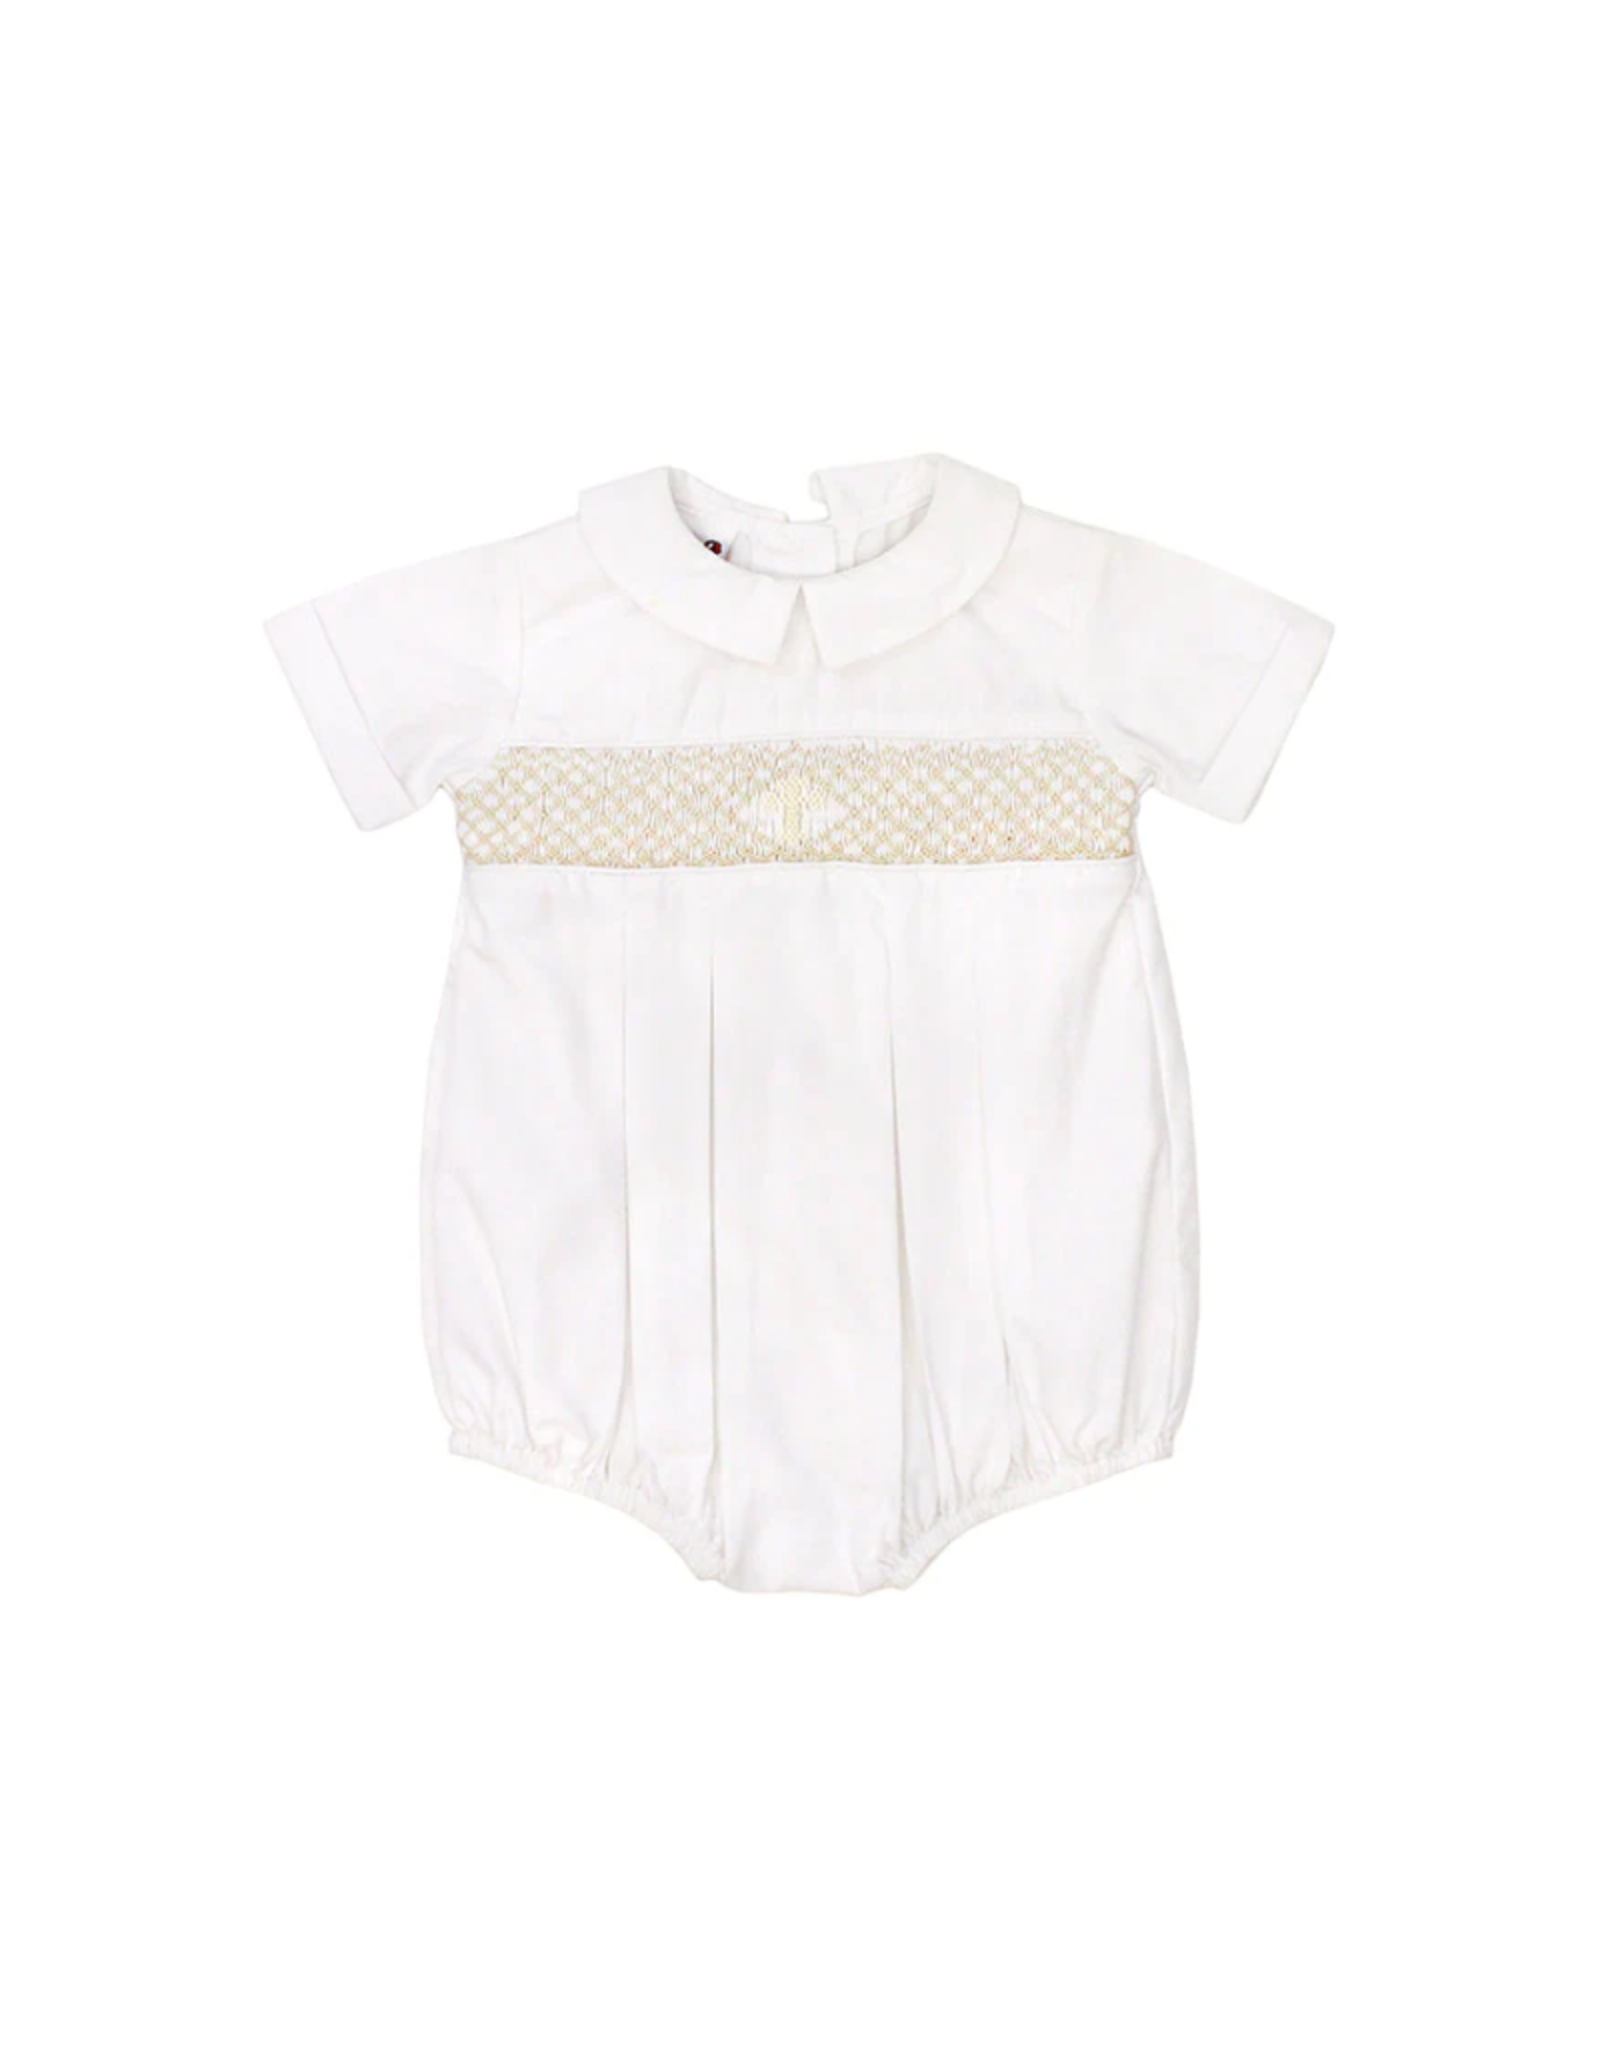 The Bailey Boys Ivory Christening Smocked Bubble